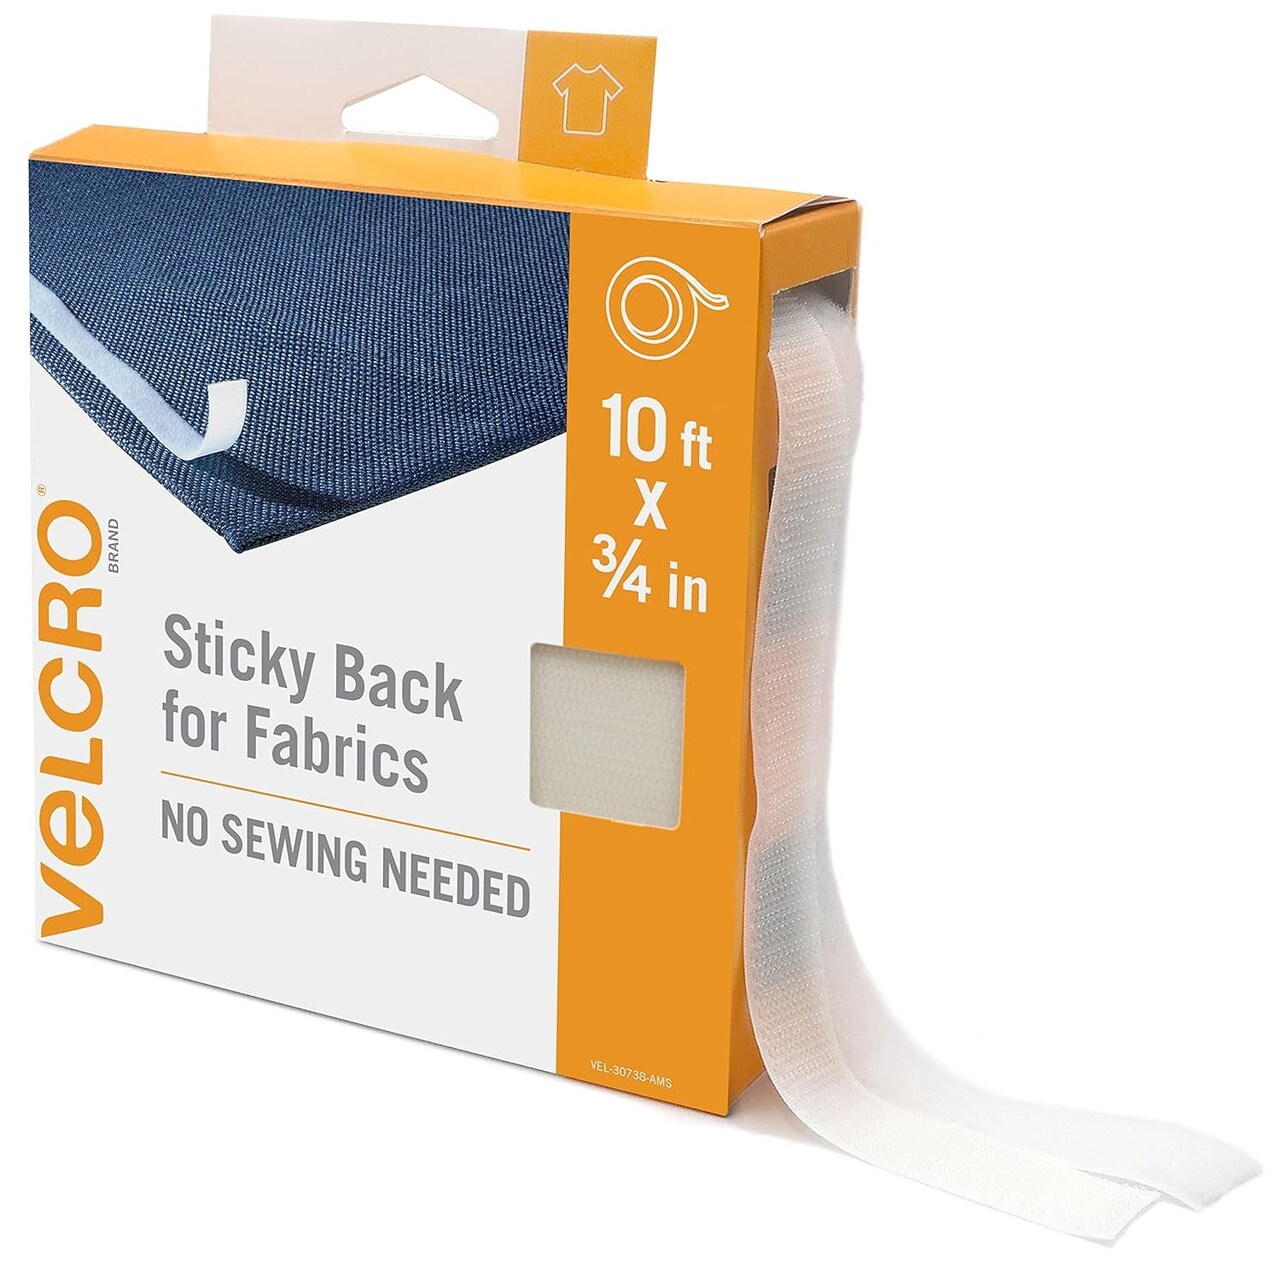 Sticky Back for Fabrics, 10 Ft Bulk Roll No Sew Tape with Adhesive, Cut Strips to Length Permanent Bond to Clothing for Hemming Replace Zippers and Snaps, White